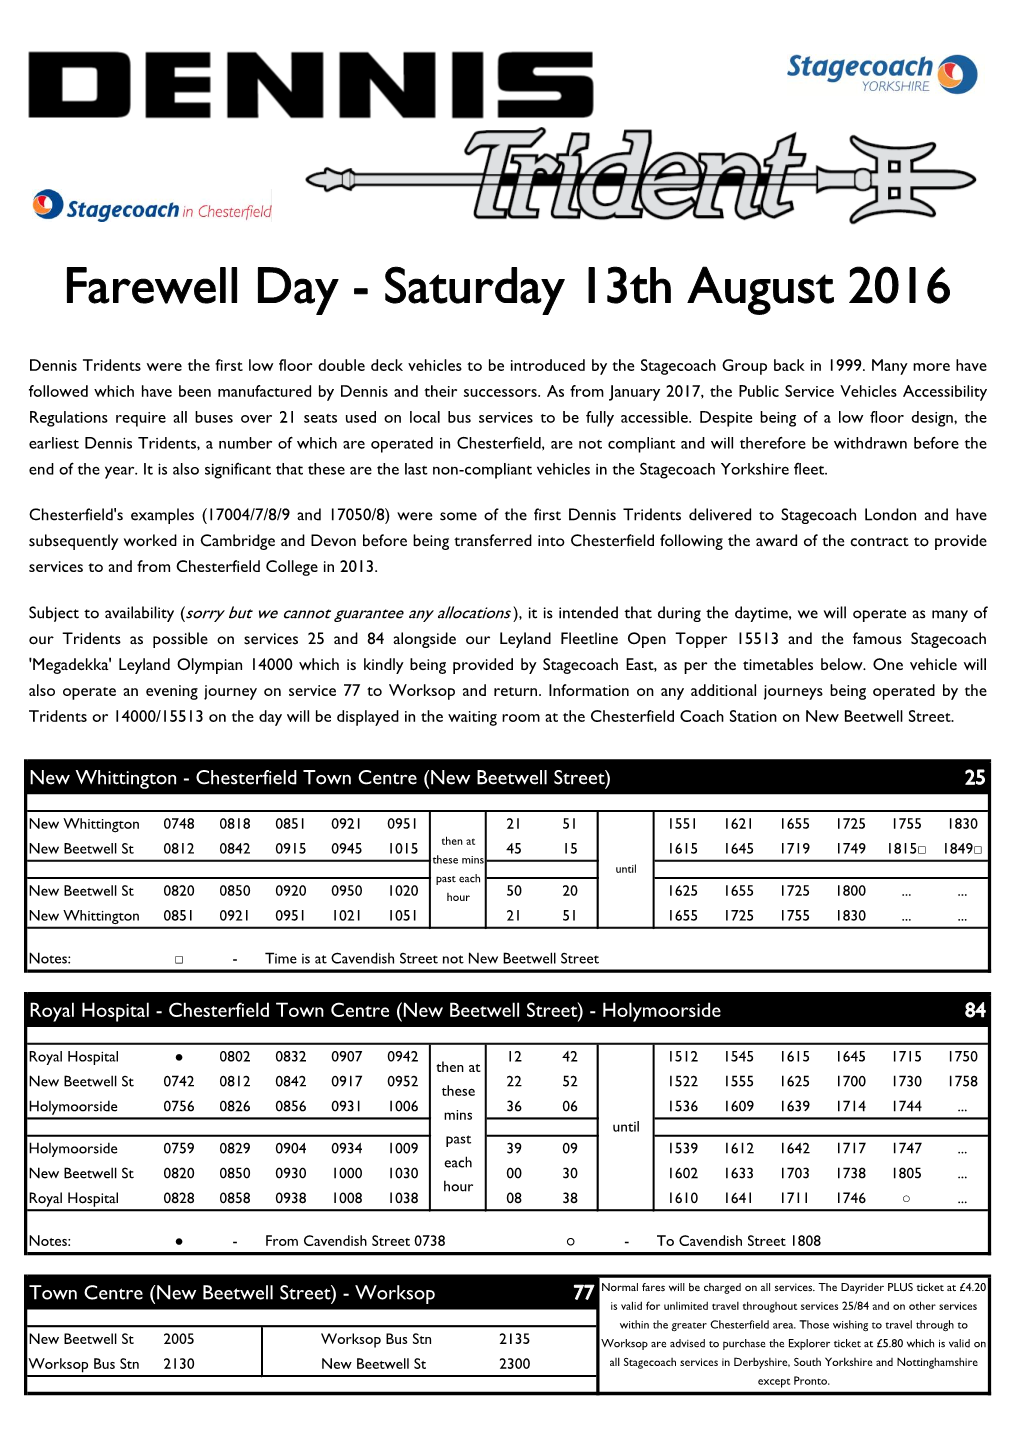 Farewell Day - Saturday 13Th August 2016